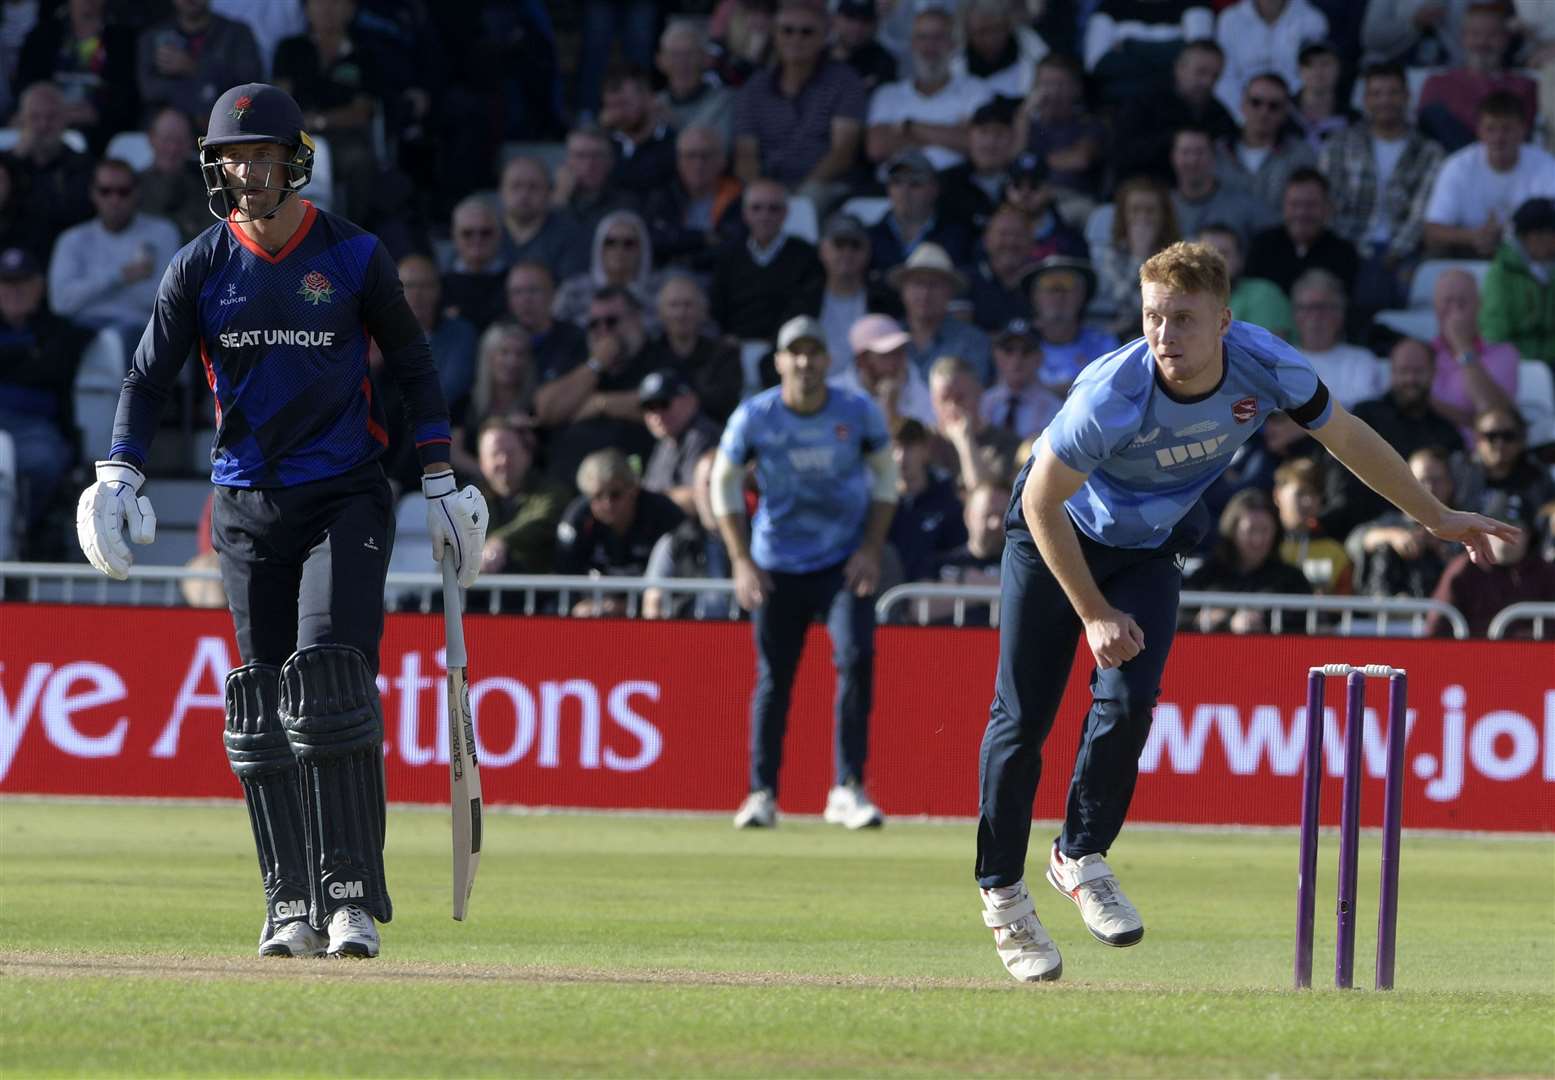 Kent's Joey Evison took 2-34 with the ball against Lancashire. Picture: Barry Goodwin